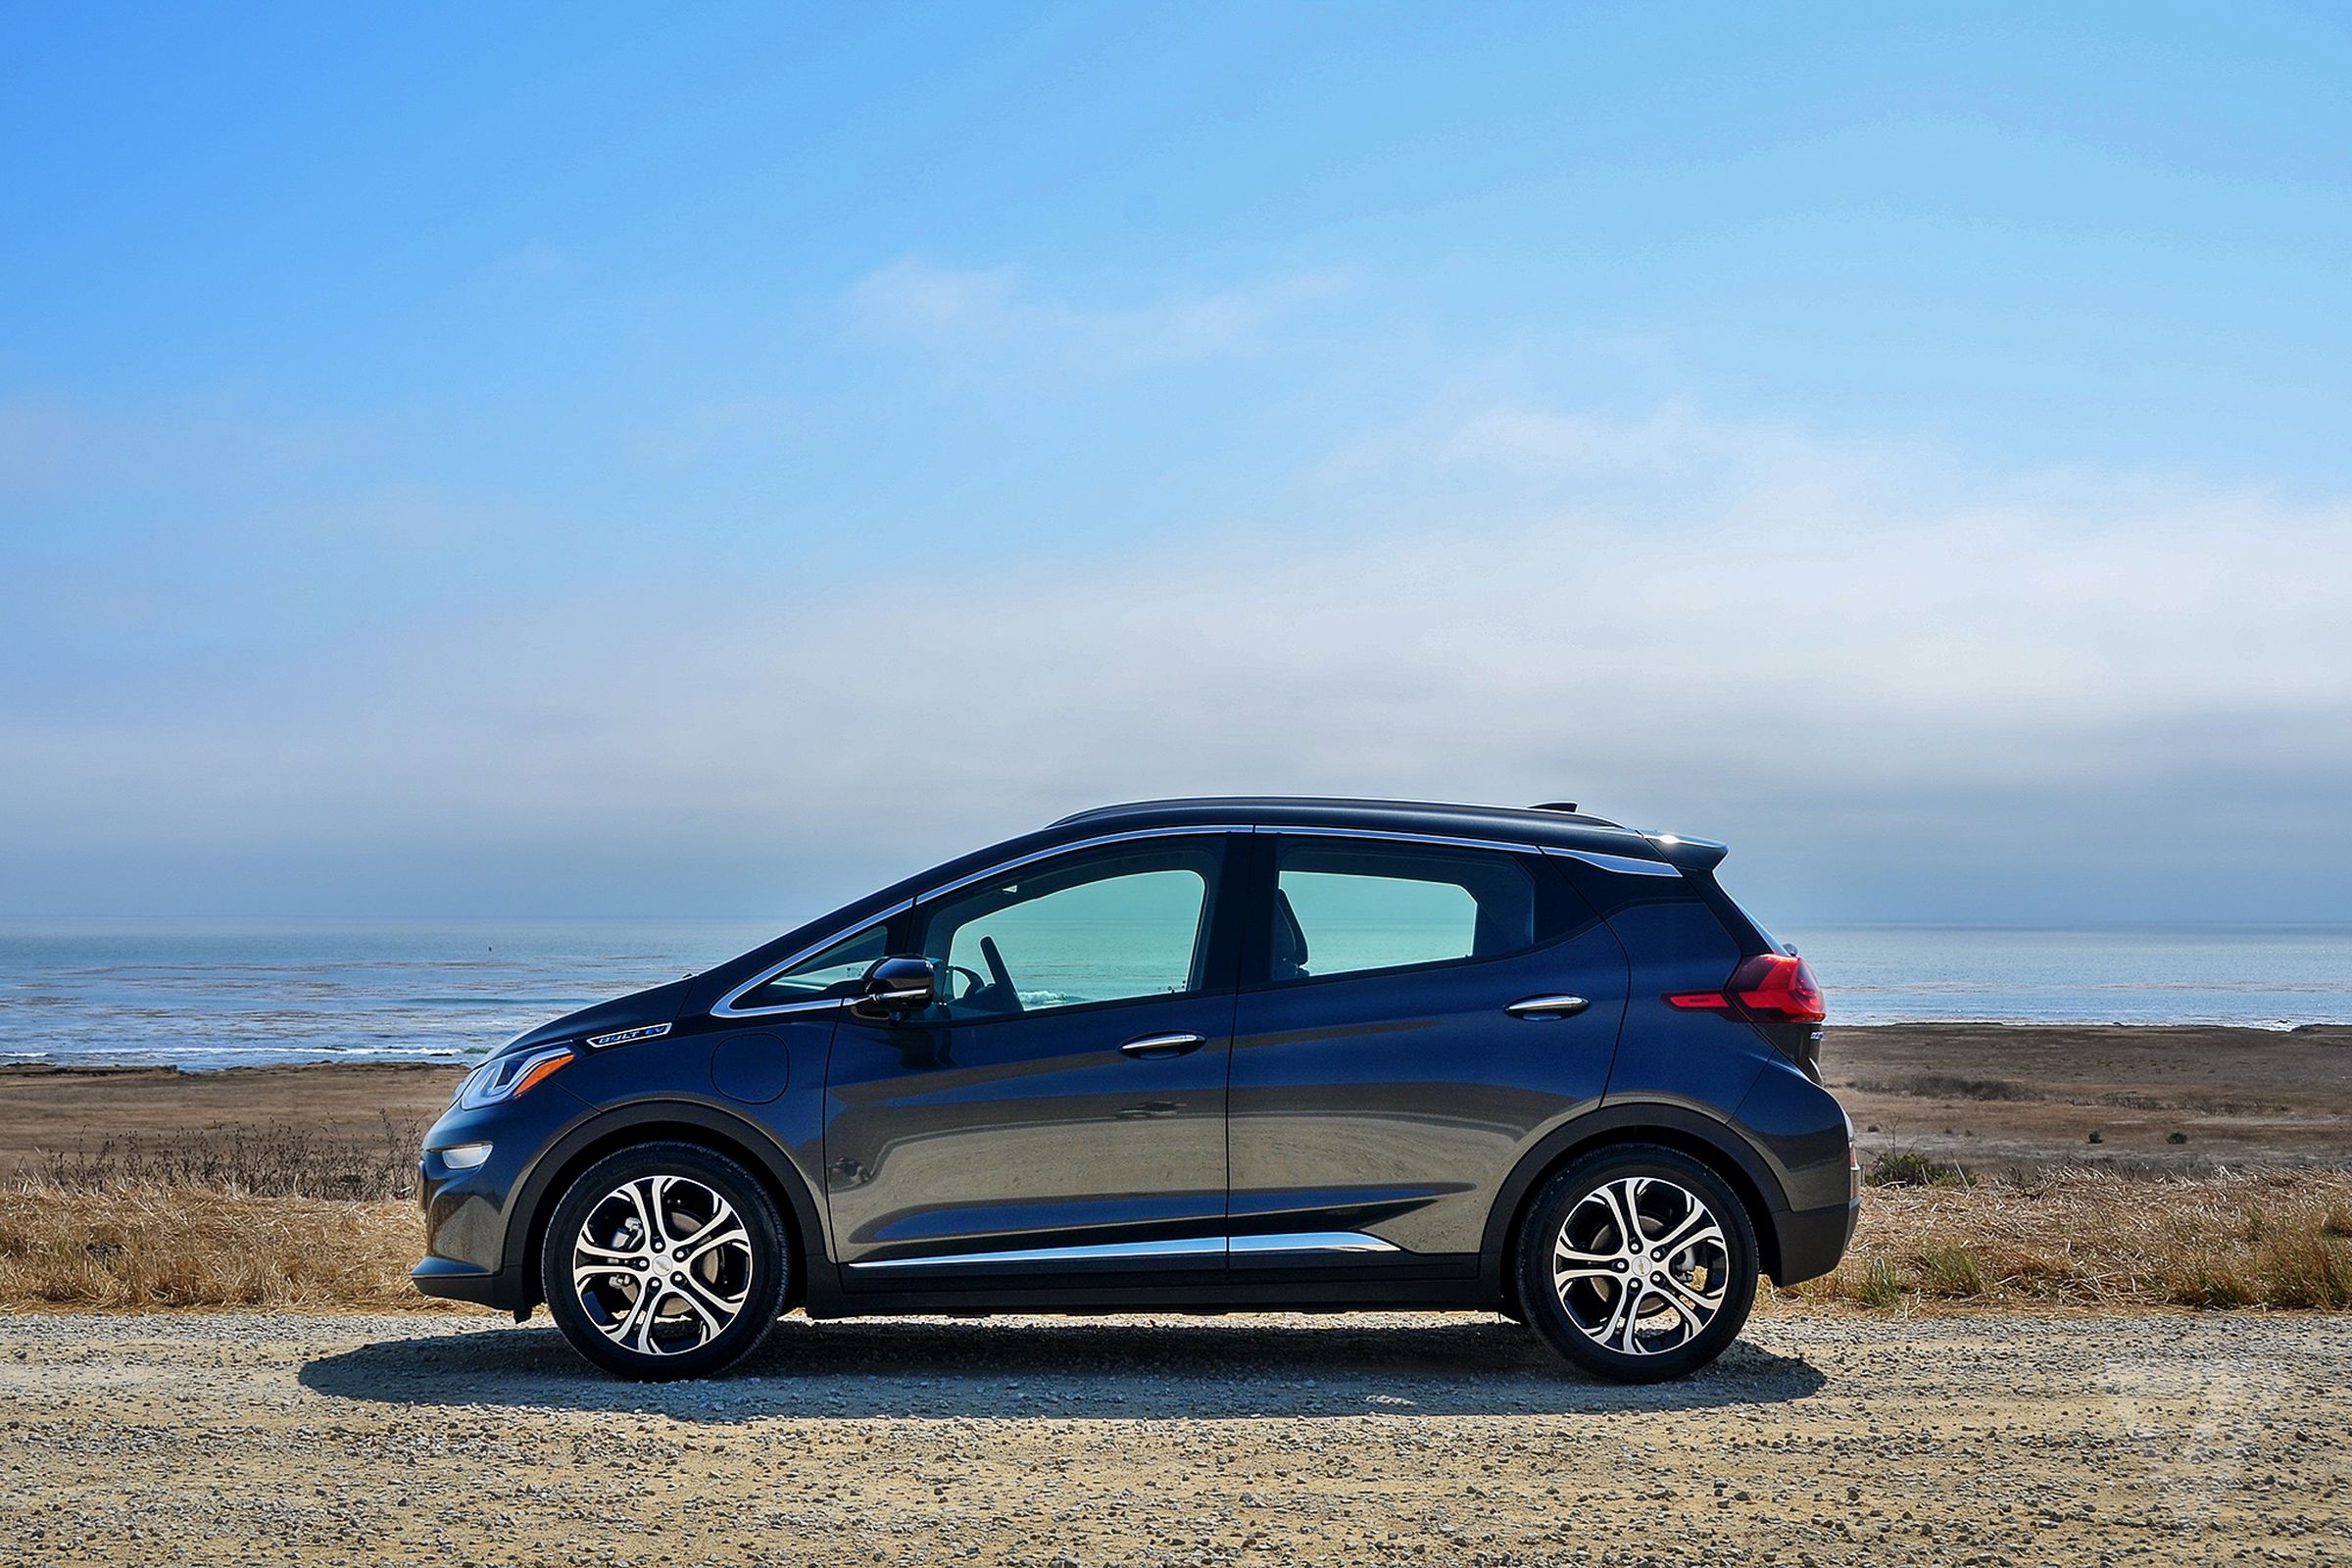 Chevy Bolt drive gallery